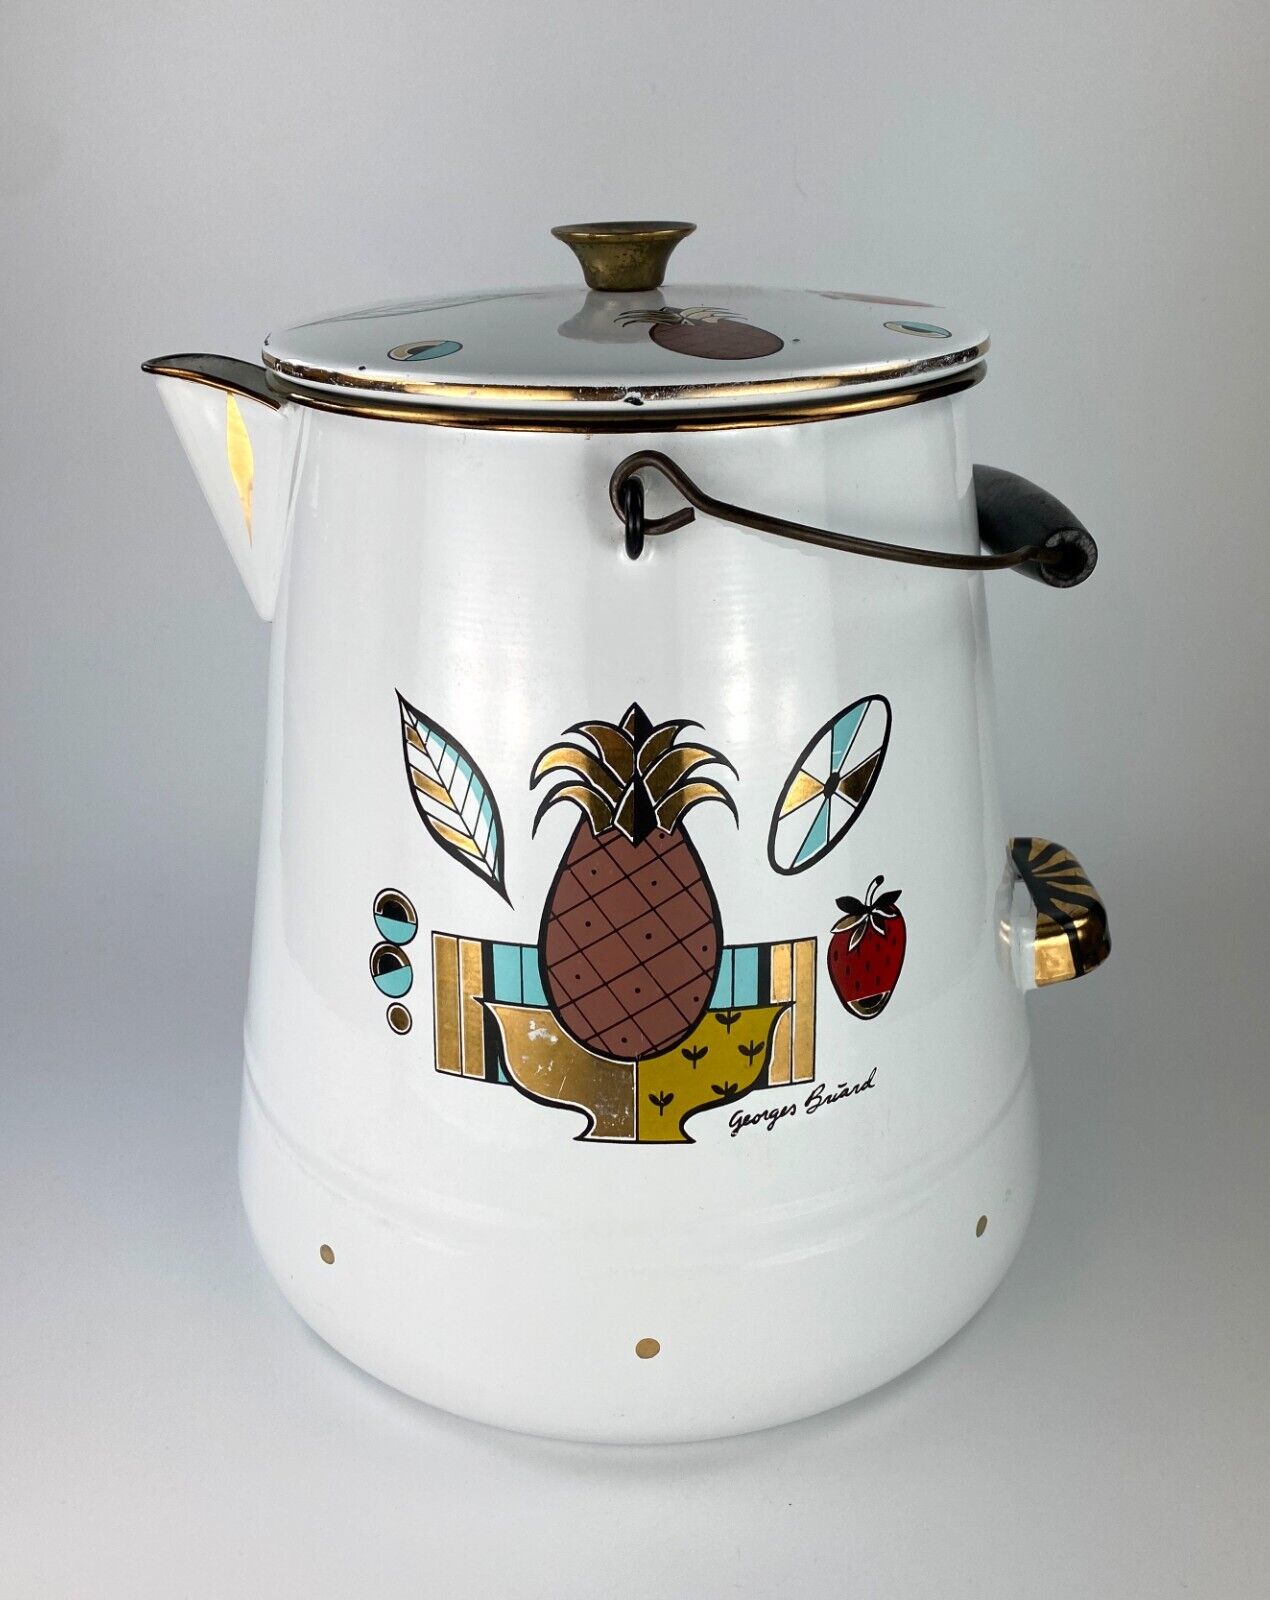 Vintage Georges Briard Large Enamelware Pitcher / Kettle — Pineapple Ambrosia